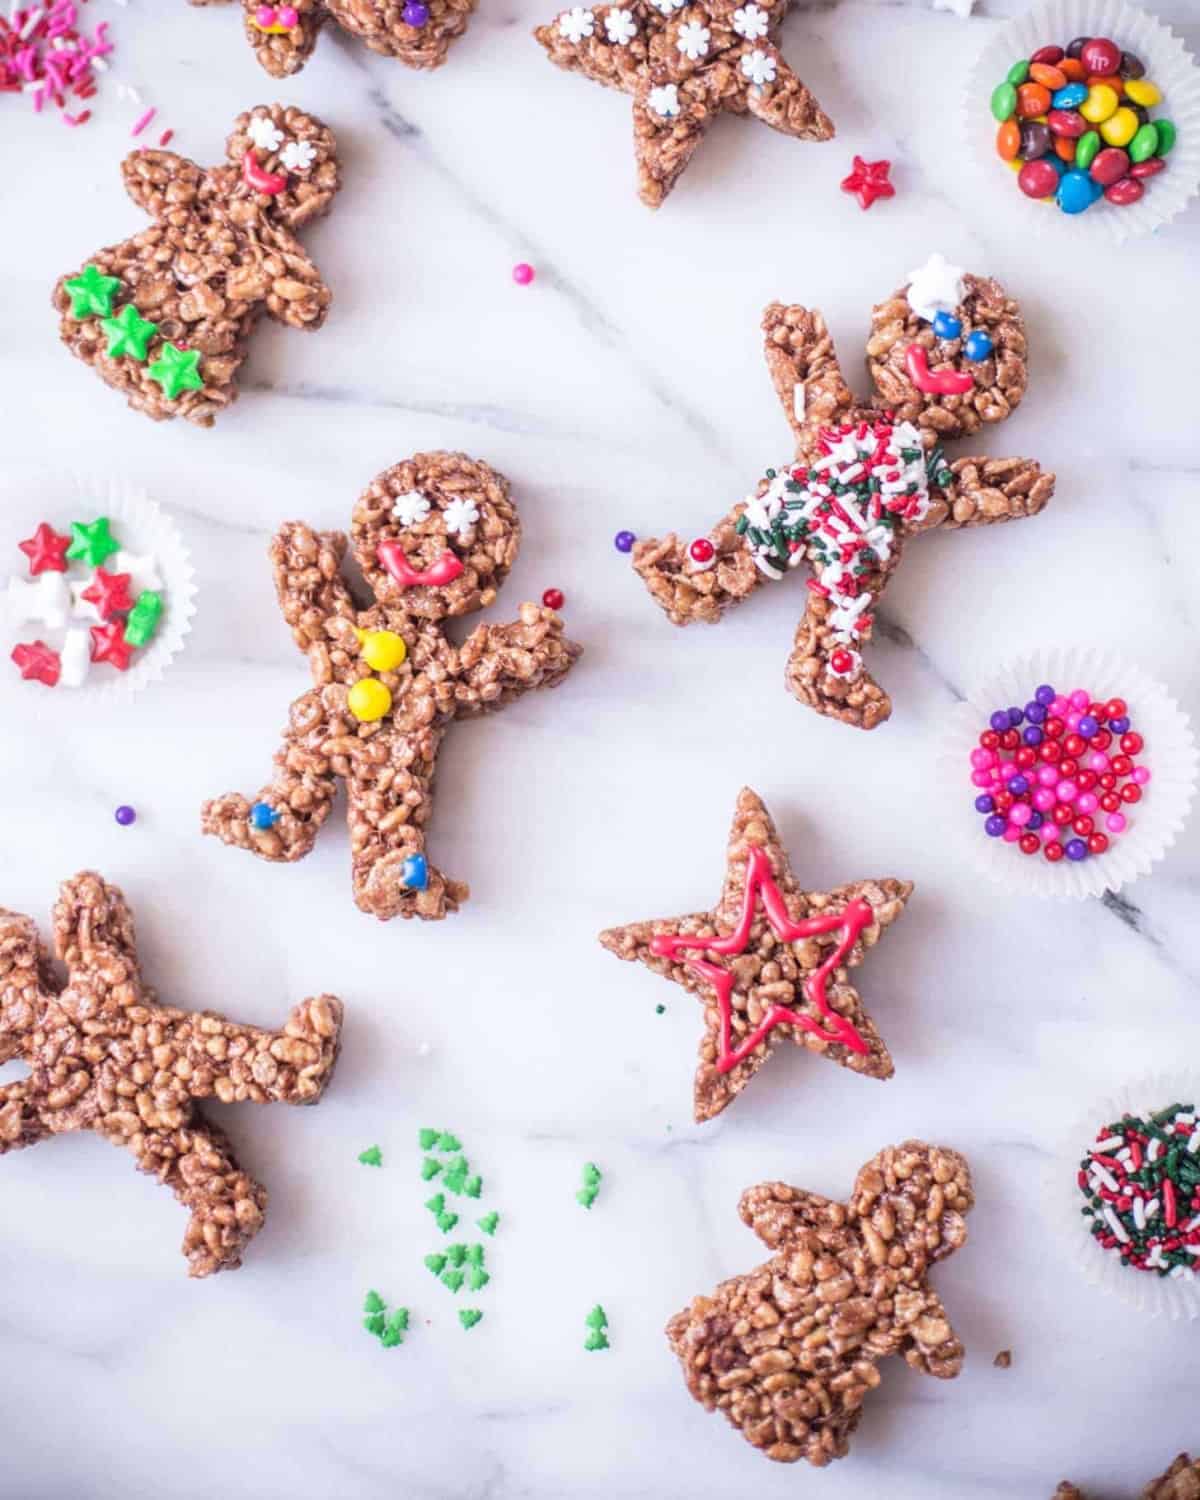 Chocolate Rice Krispies Gingerbread Men on a white table